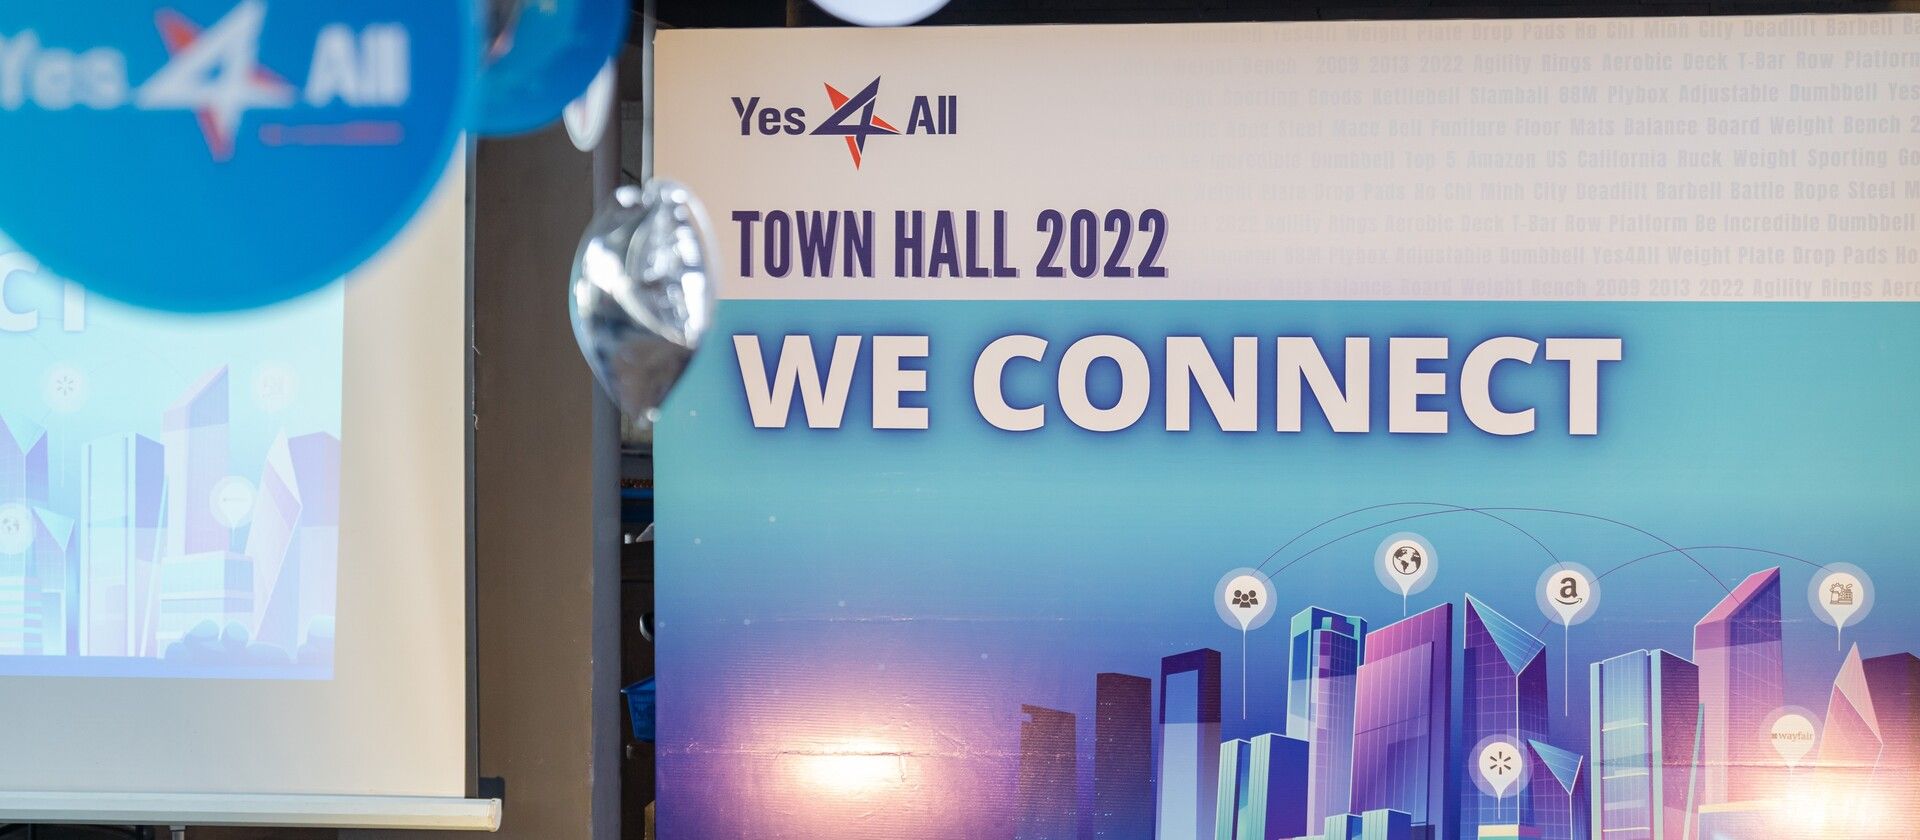 TOWNHALL 2022 - WE CONNECT